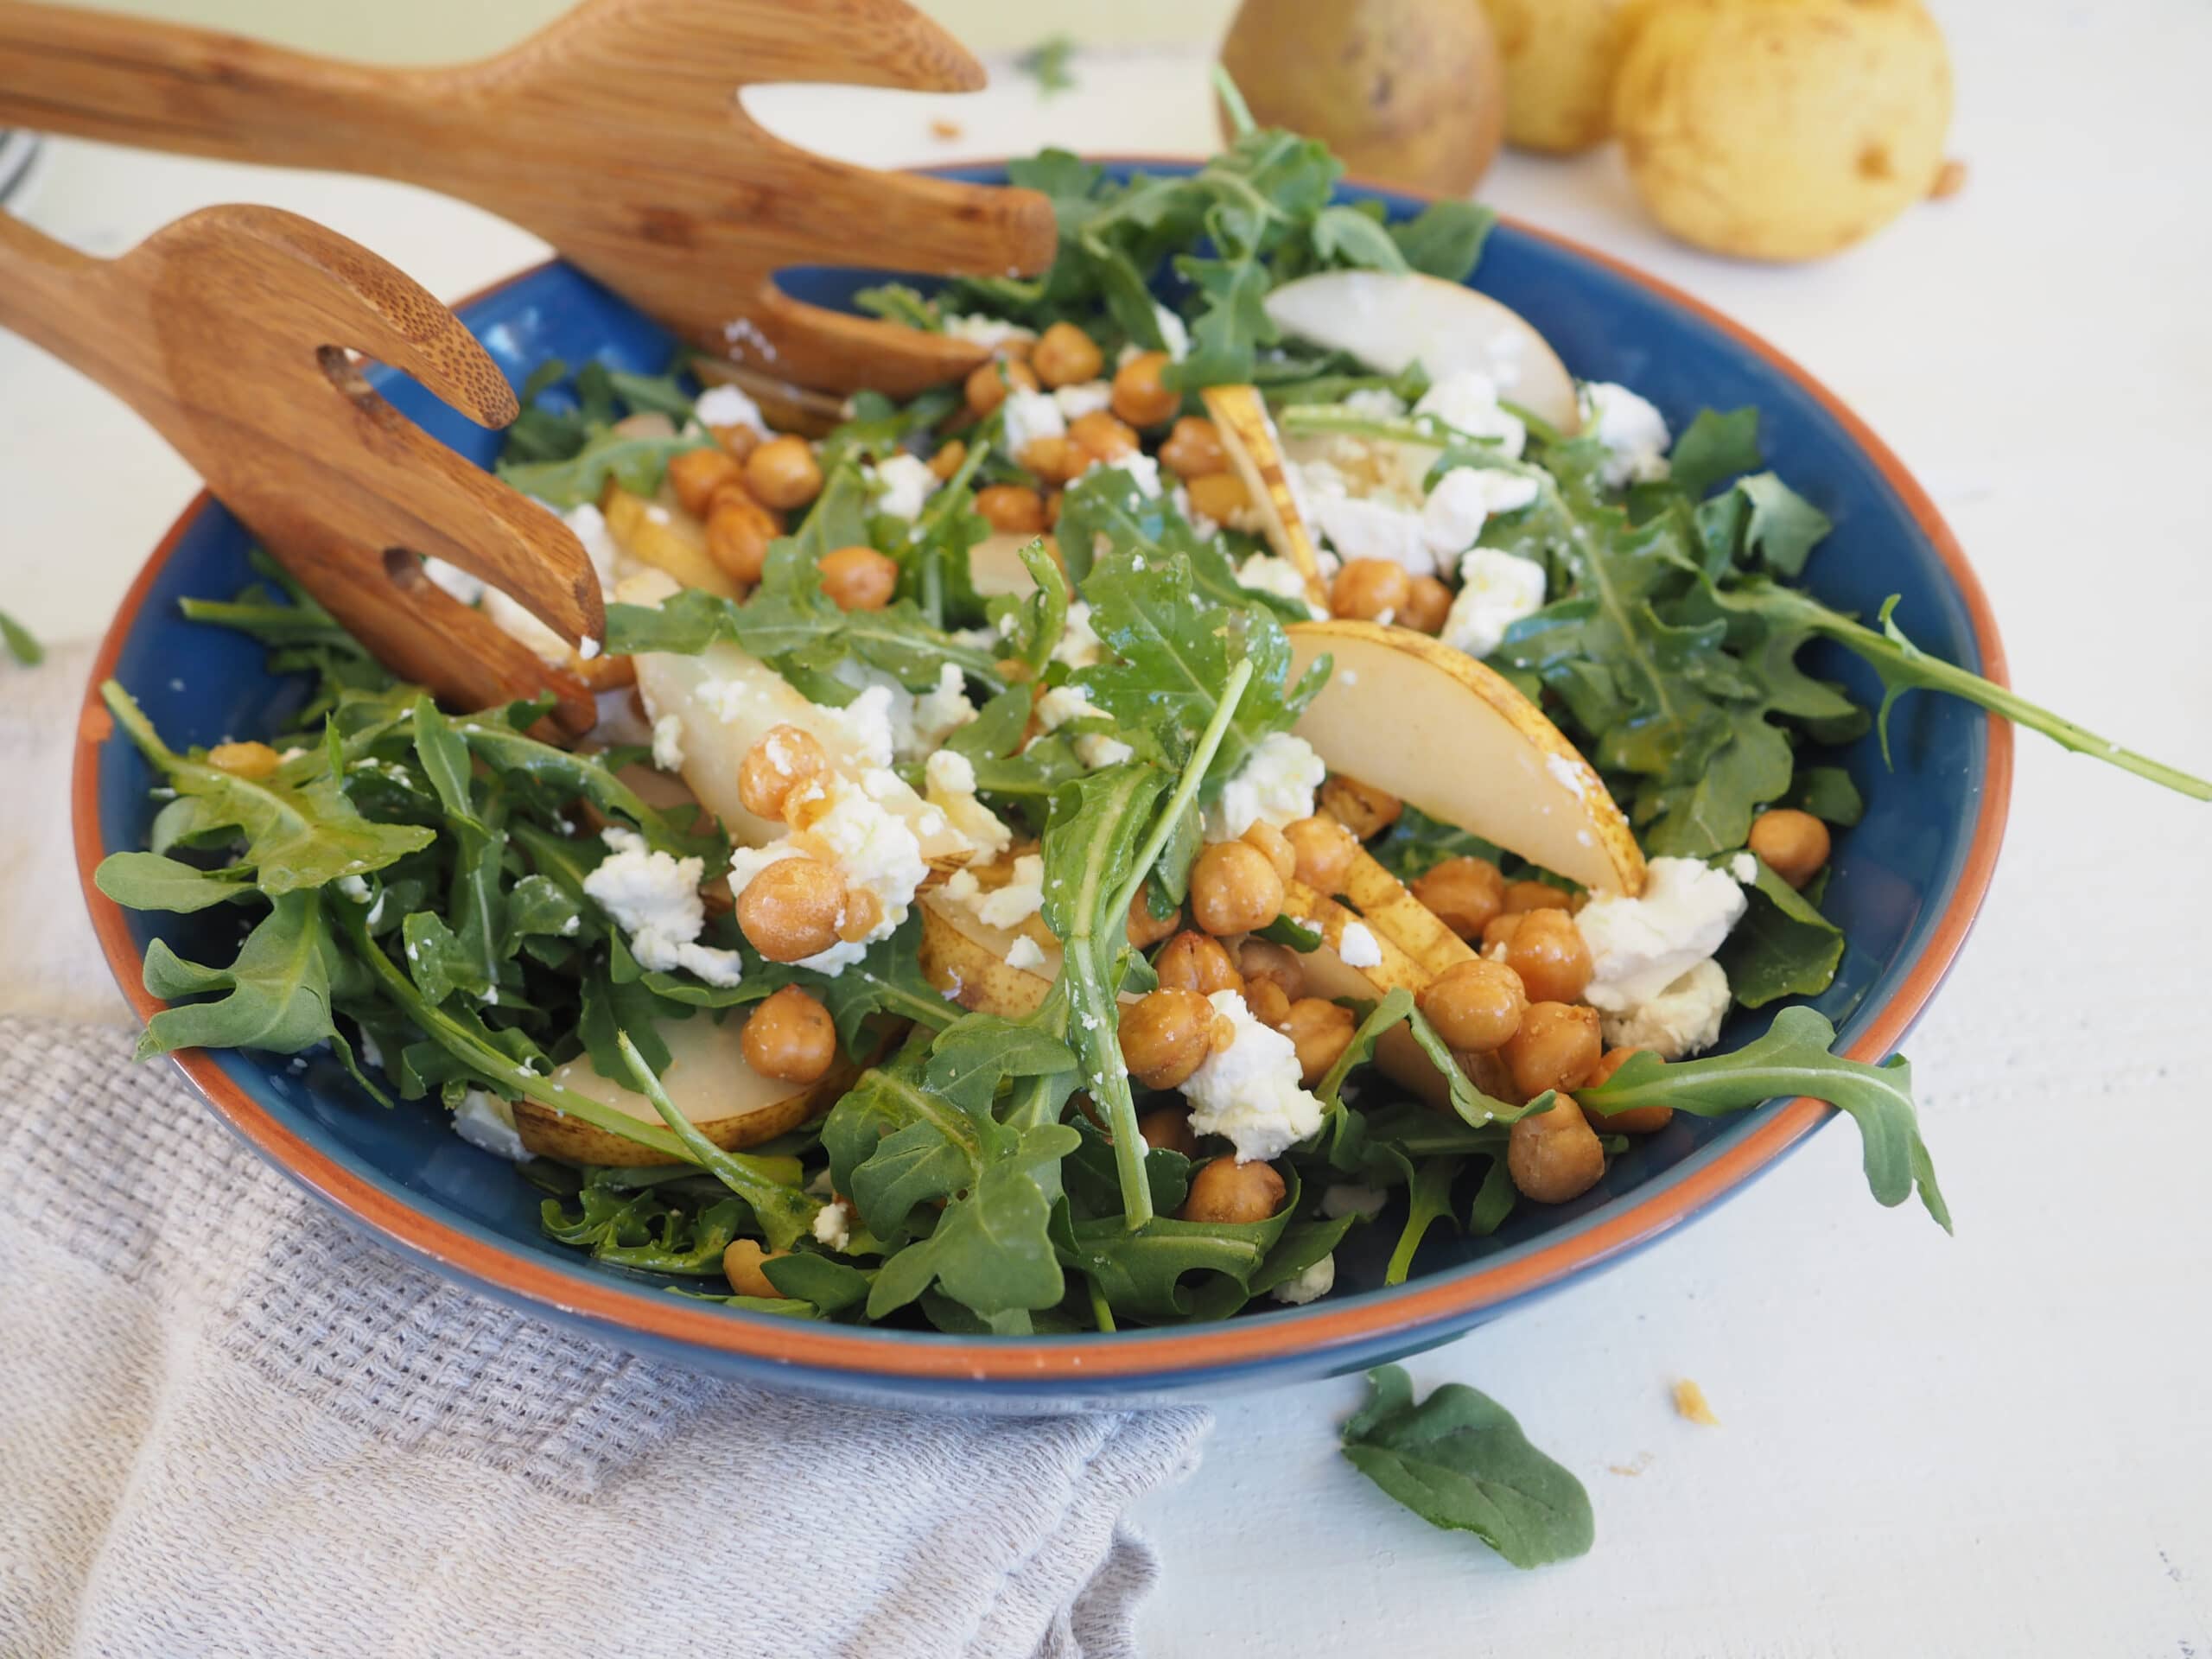 This arugula, pear, and roasted chickpea salad is as well suited for the weeknight dinner table as it is for the holiday buffet. The optional goat cheese adds a creamy texture that pairs perfectly with the pears. Roasted chickpeas add a fun, salty crunch and the apple cider and maple vinaigrette pulls it all together. Vegetarian. Gluten-free.